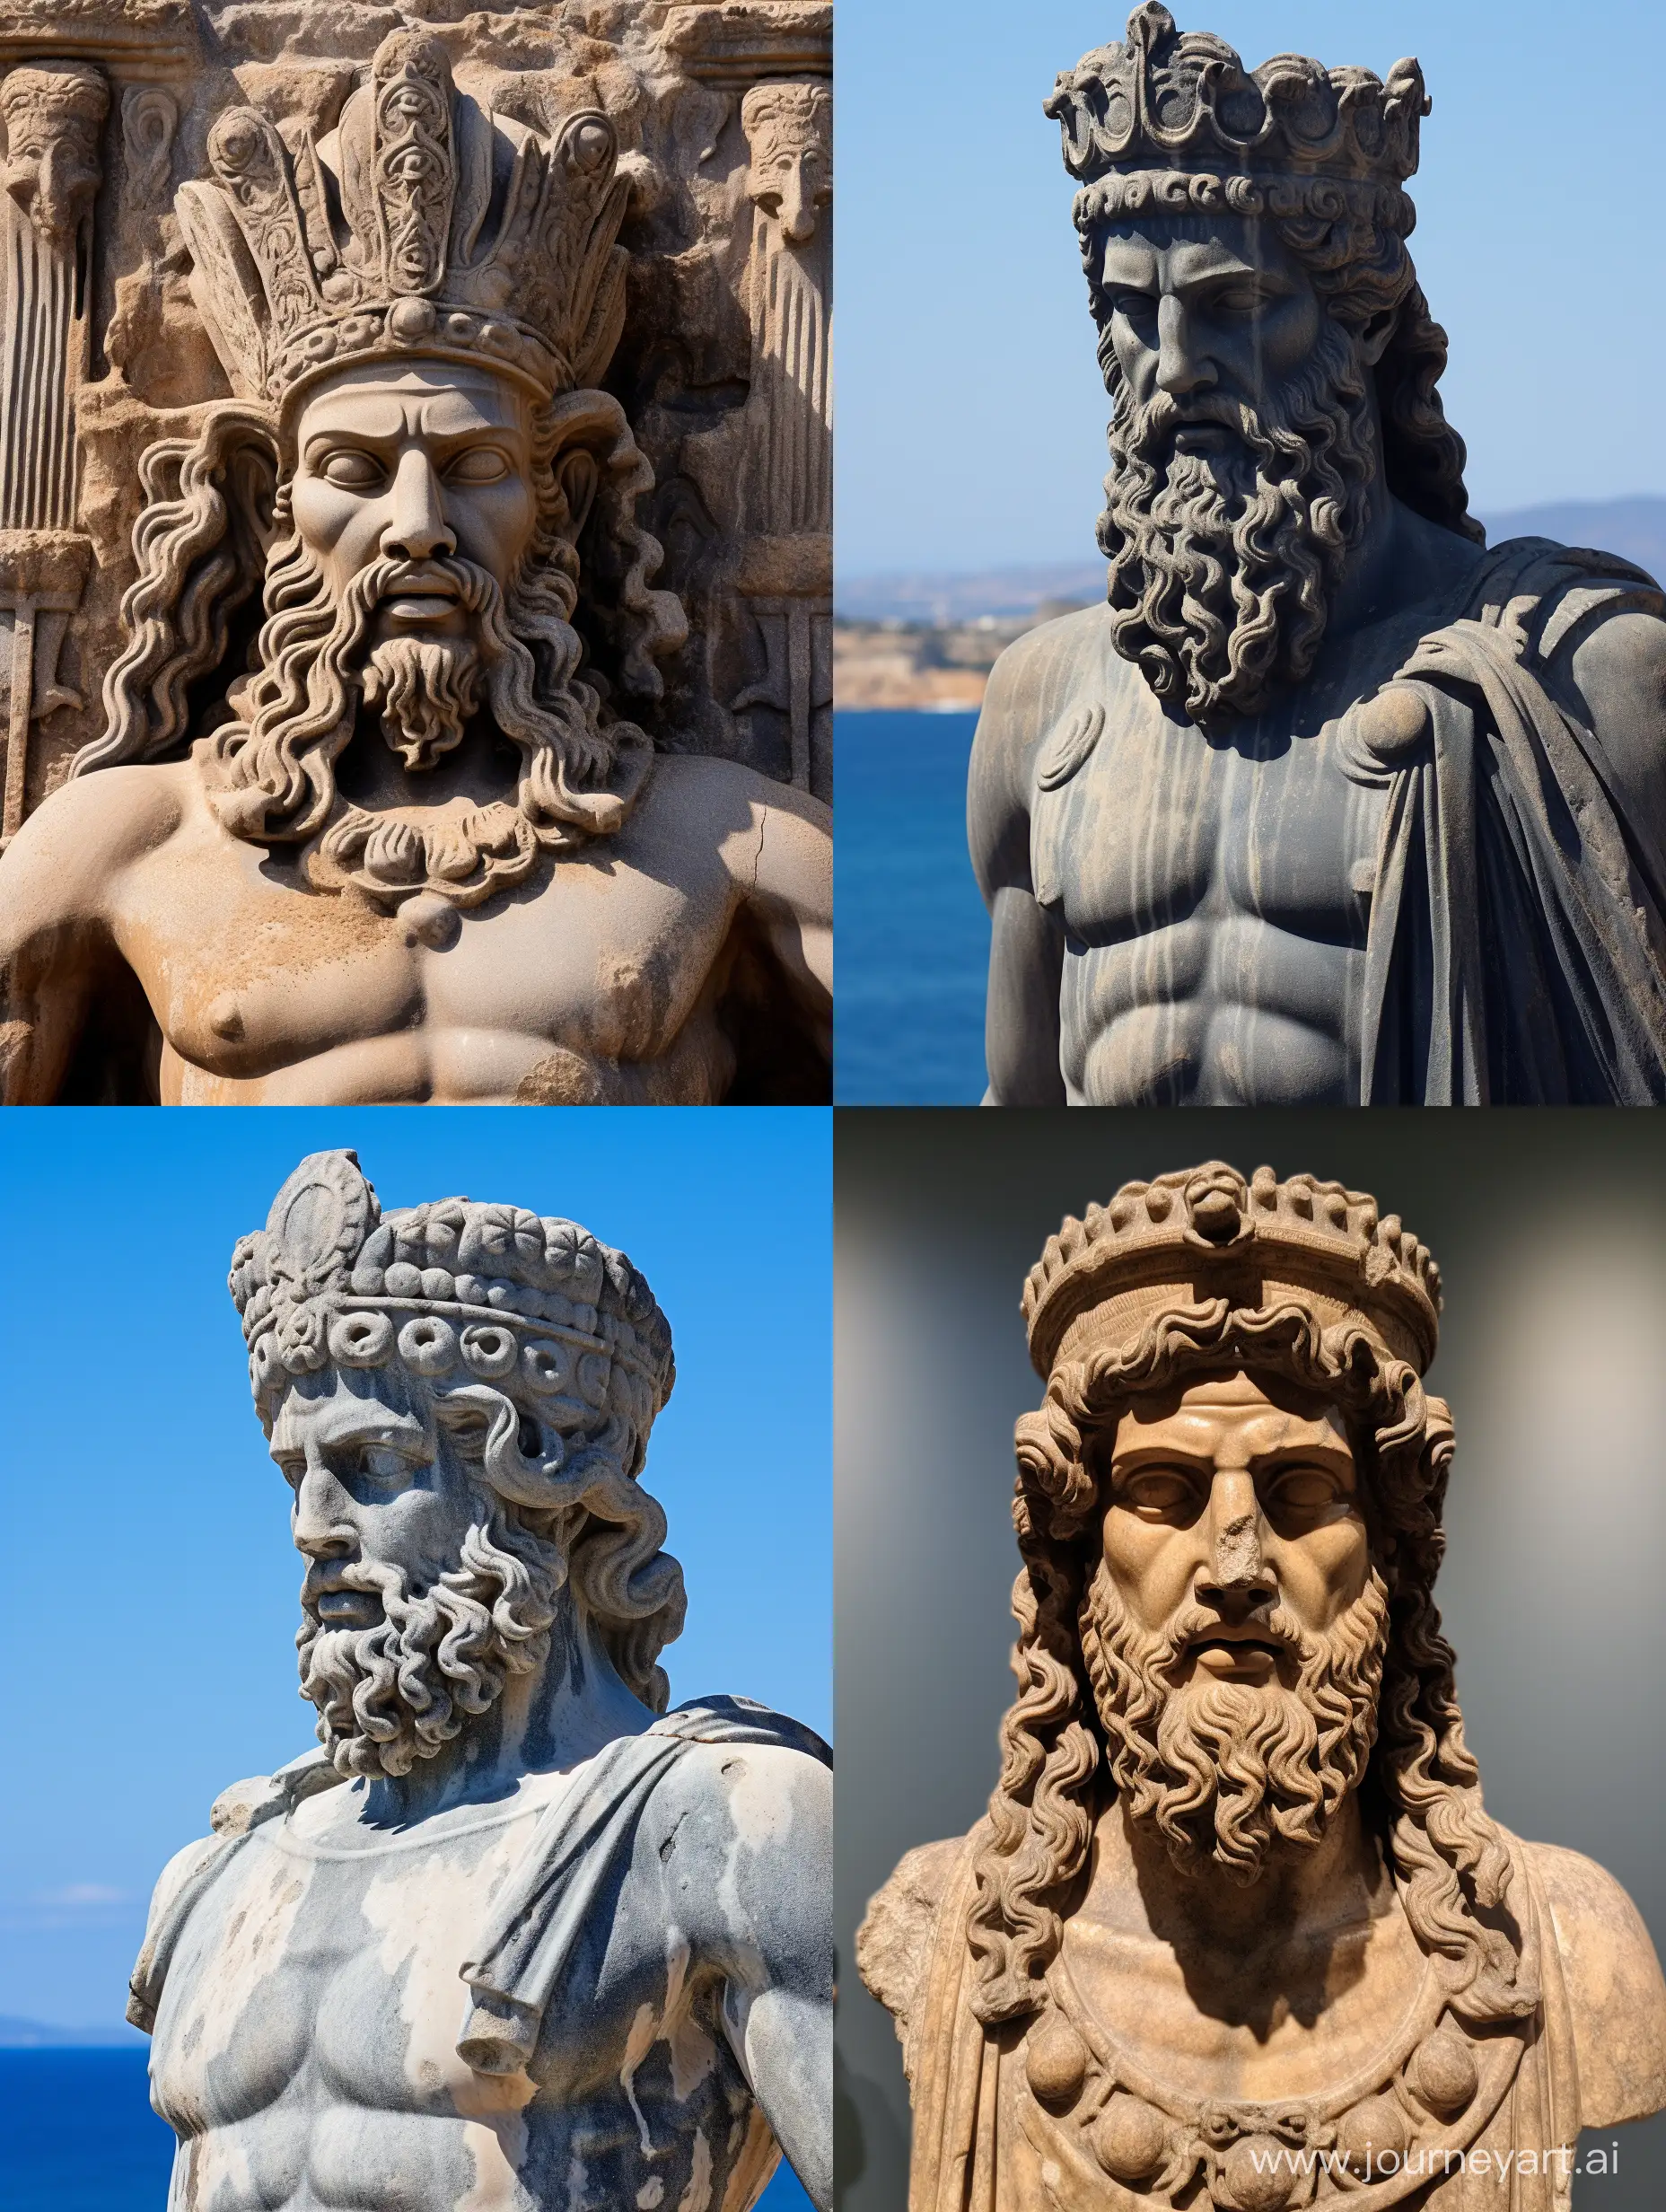 King-Minos-of-Crete-Majestic-Portrait-in-Hoary-Robes-and-Minoan-Crown